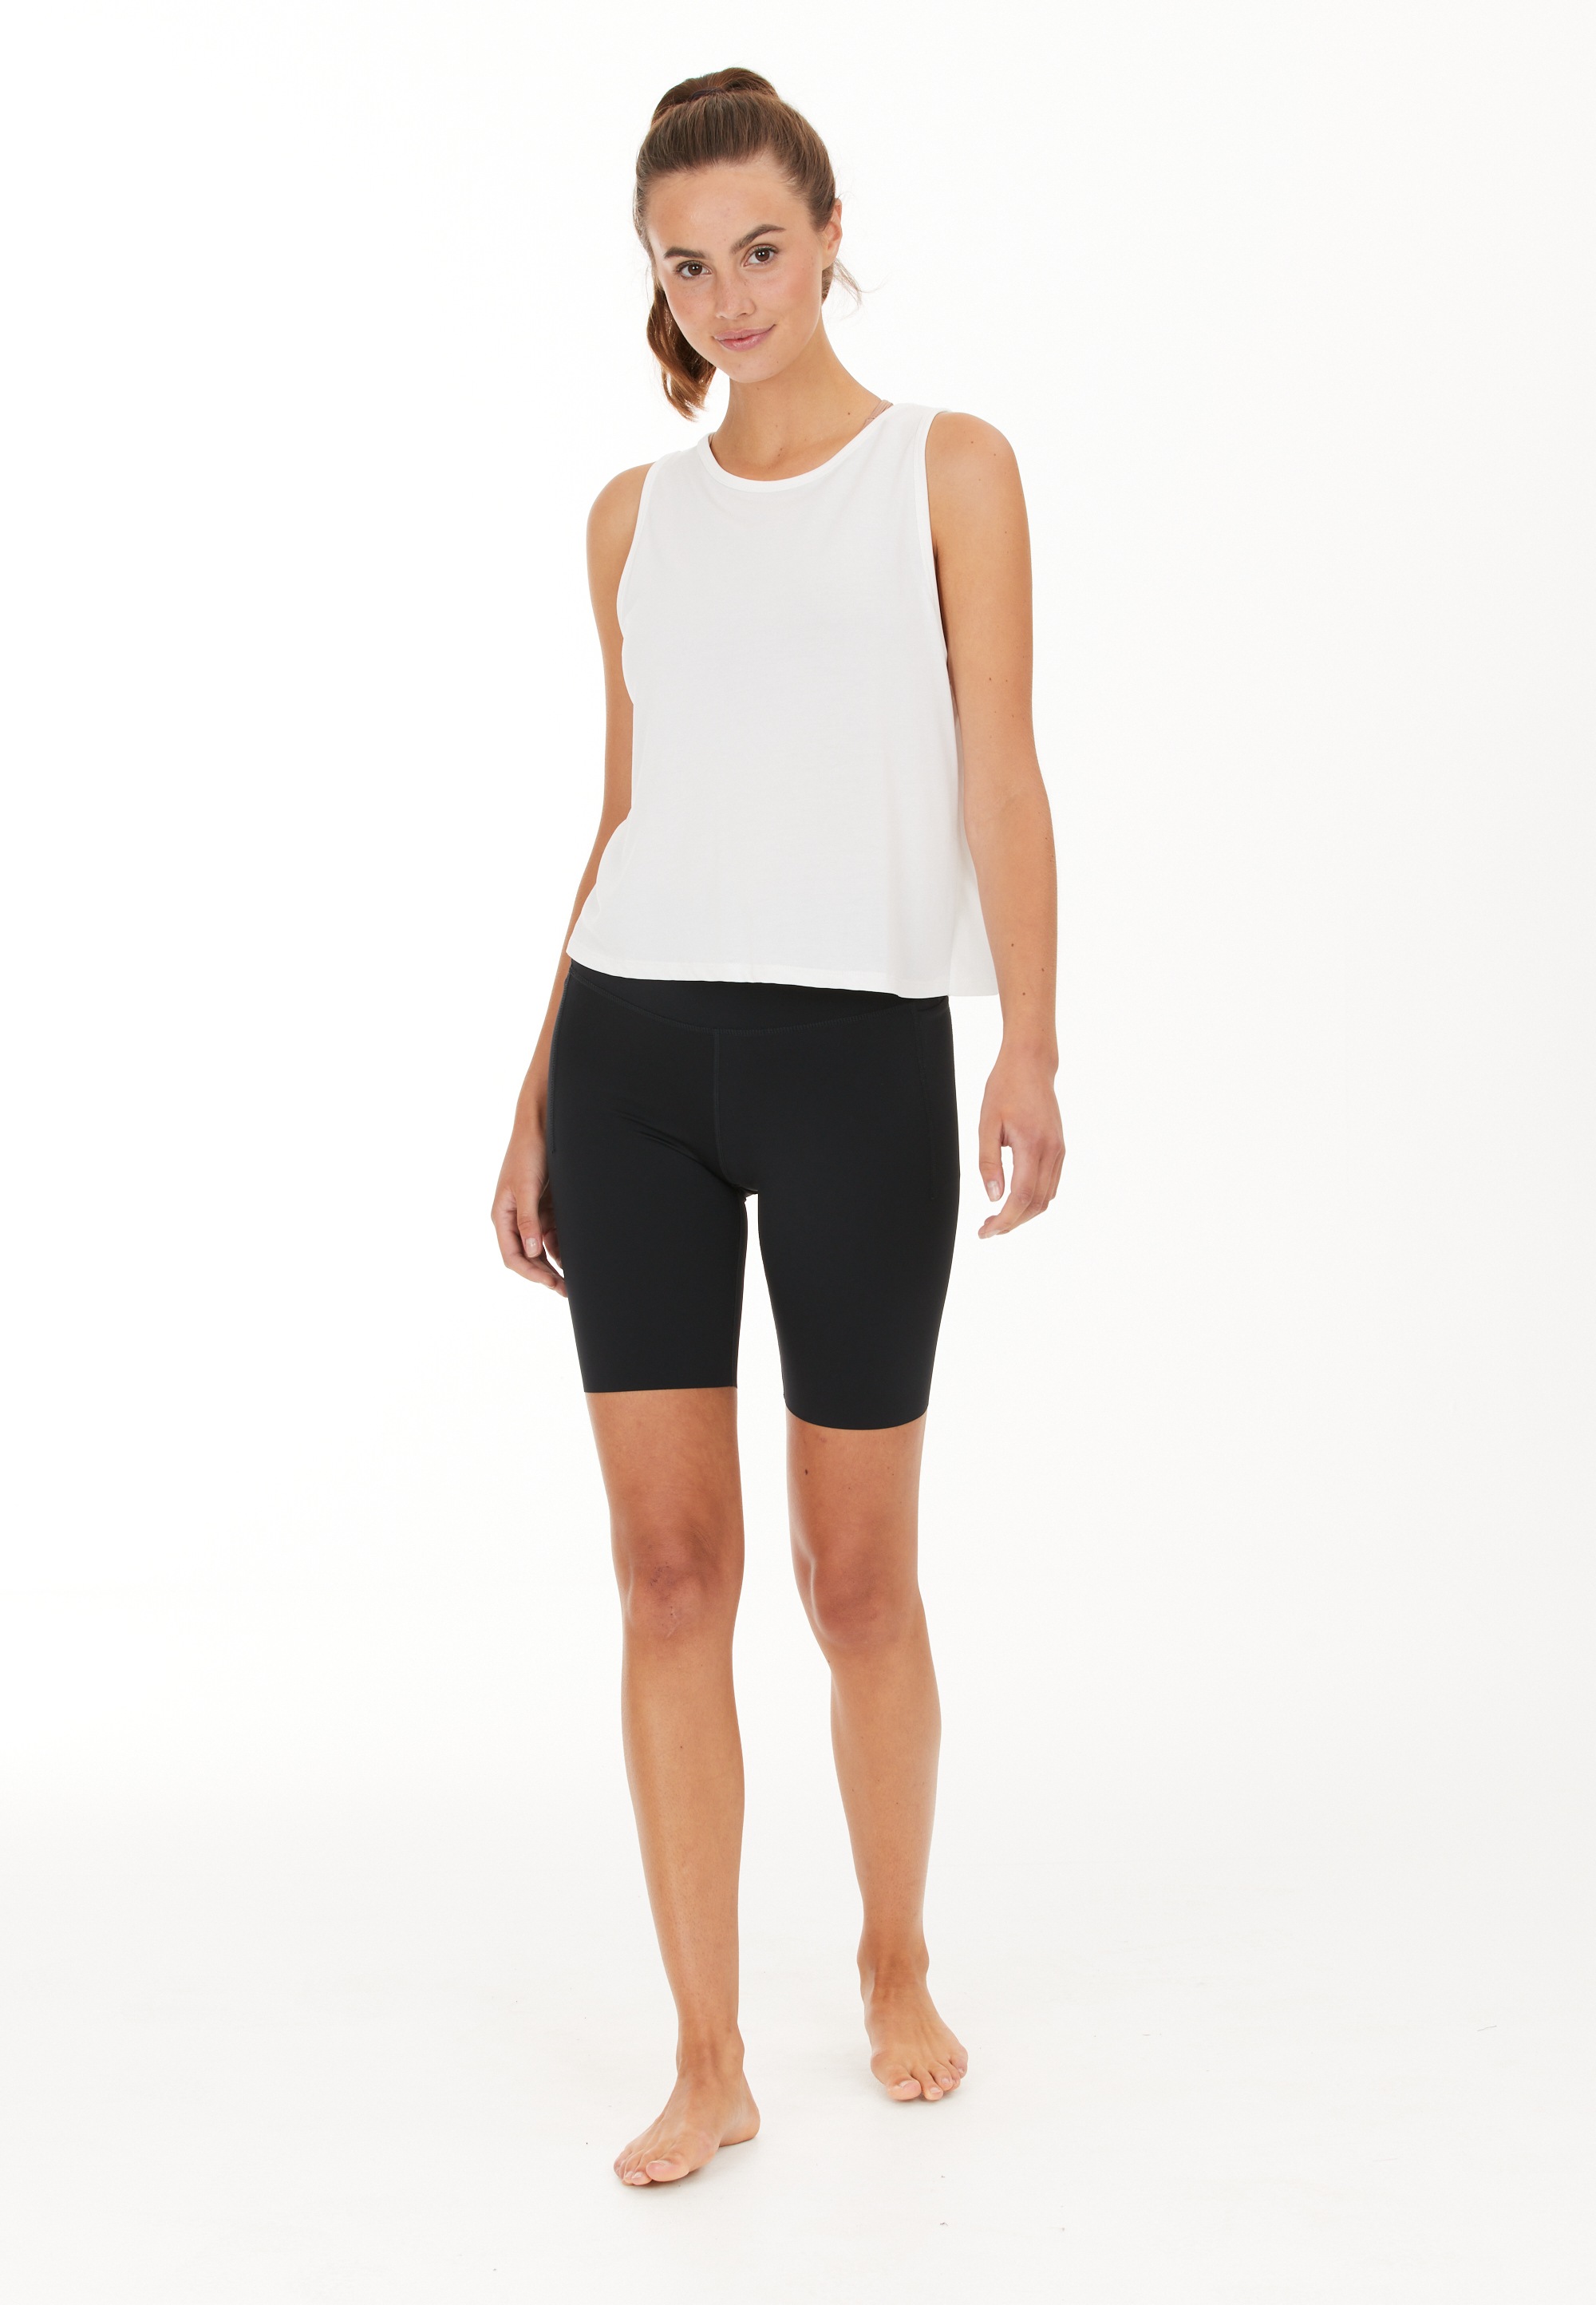 ATHLECIA Tanktop »Sweeky«, mit Quick Dry-Funktion